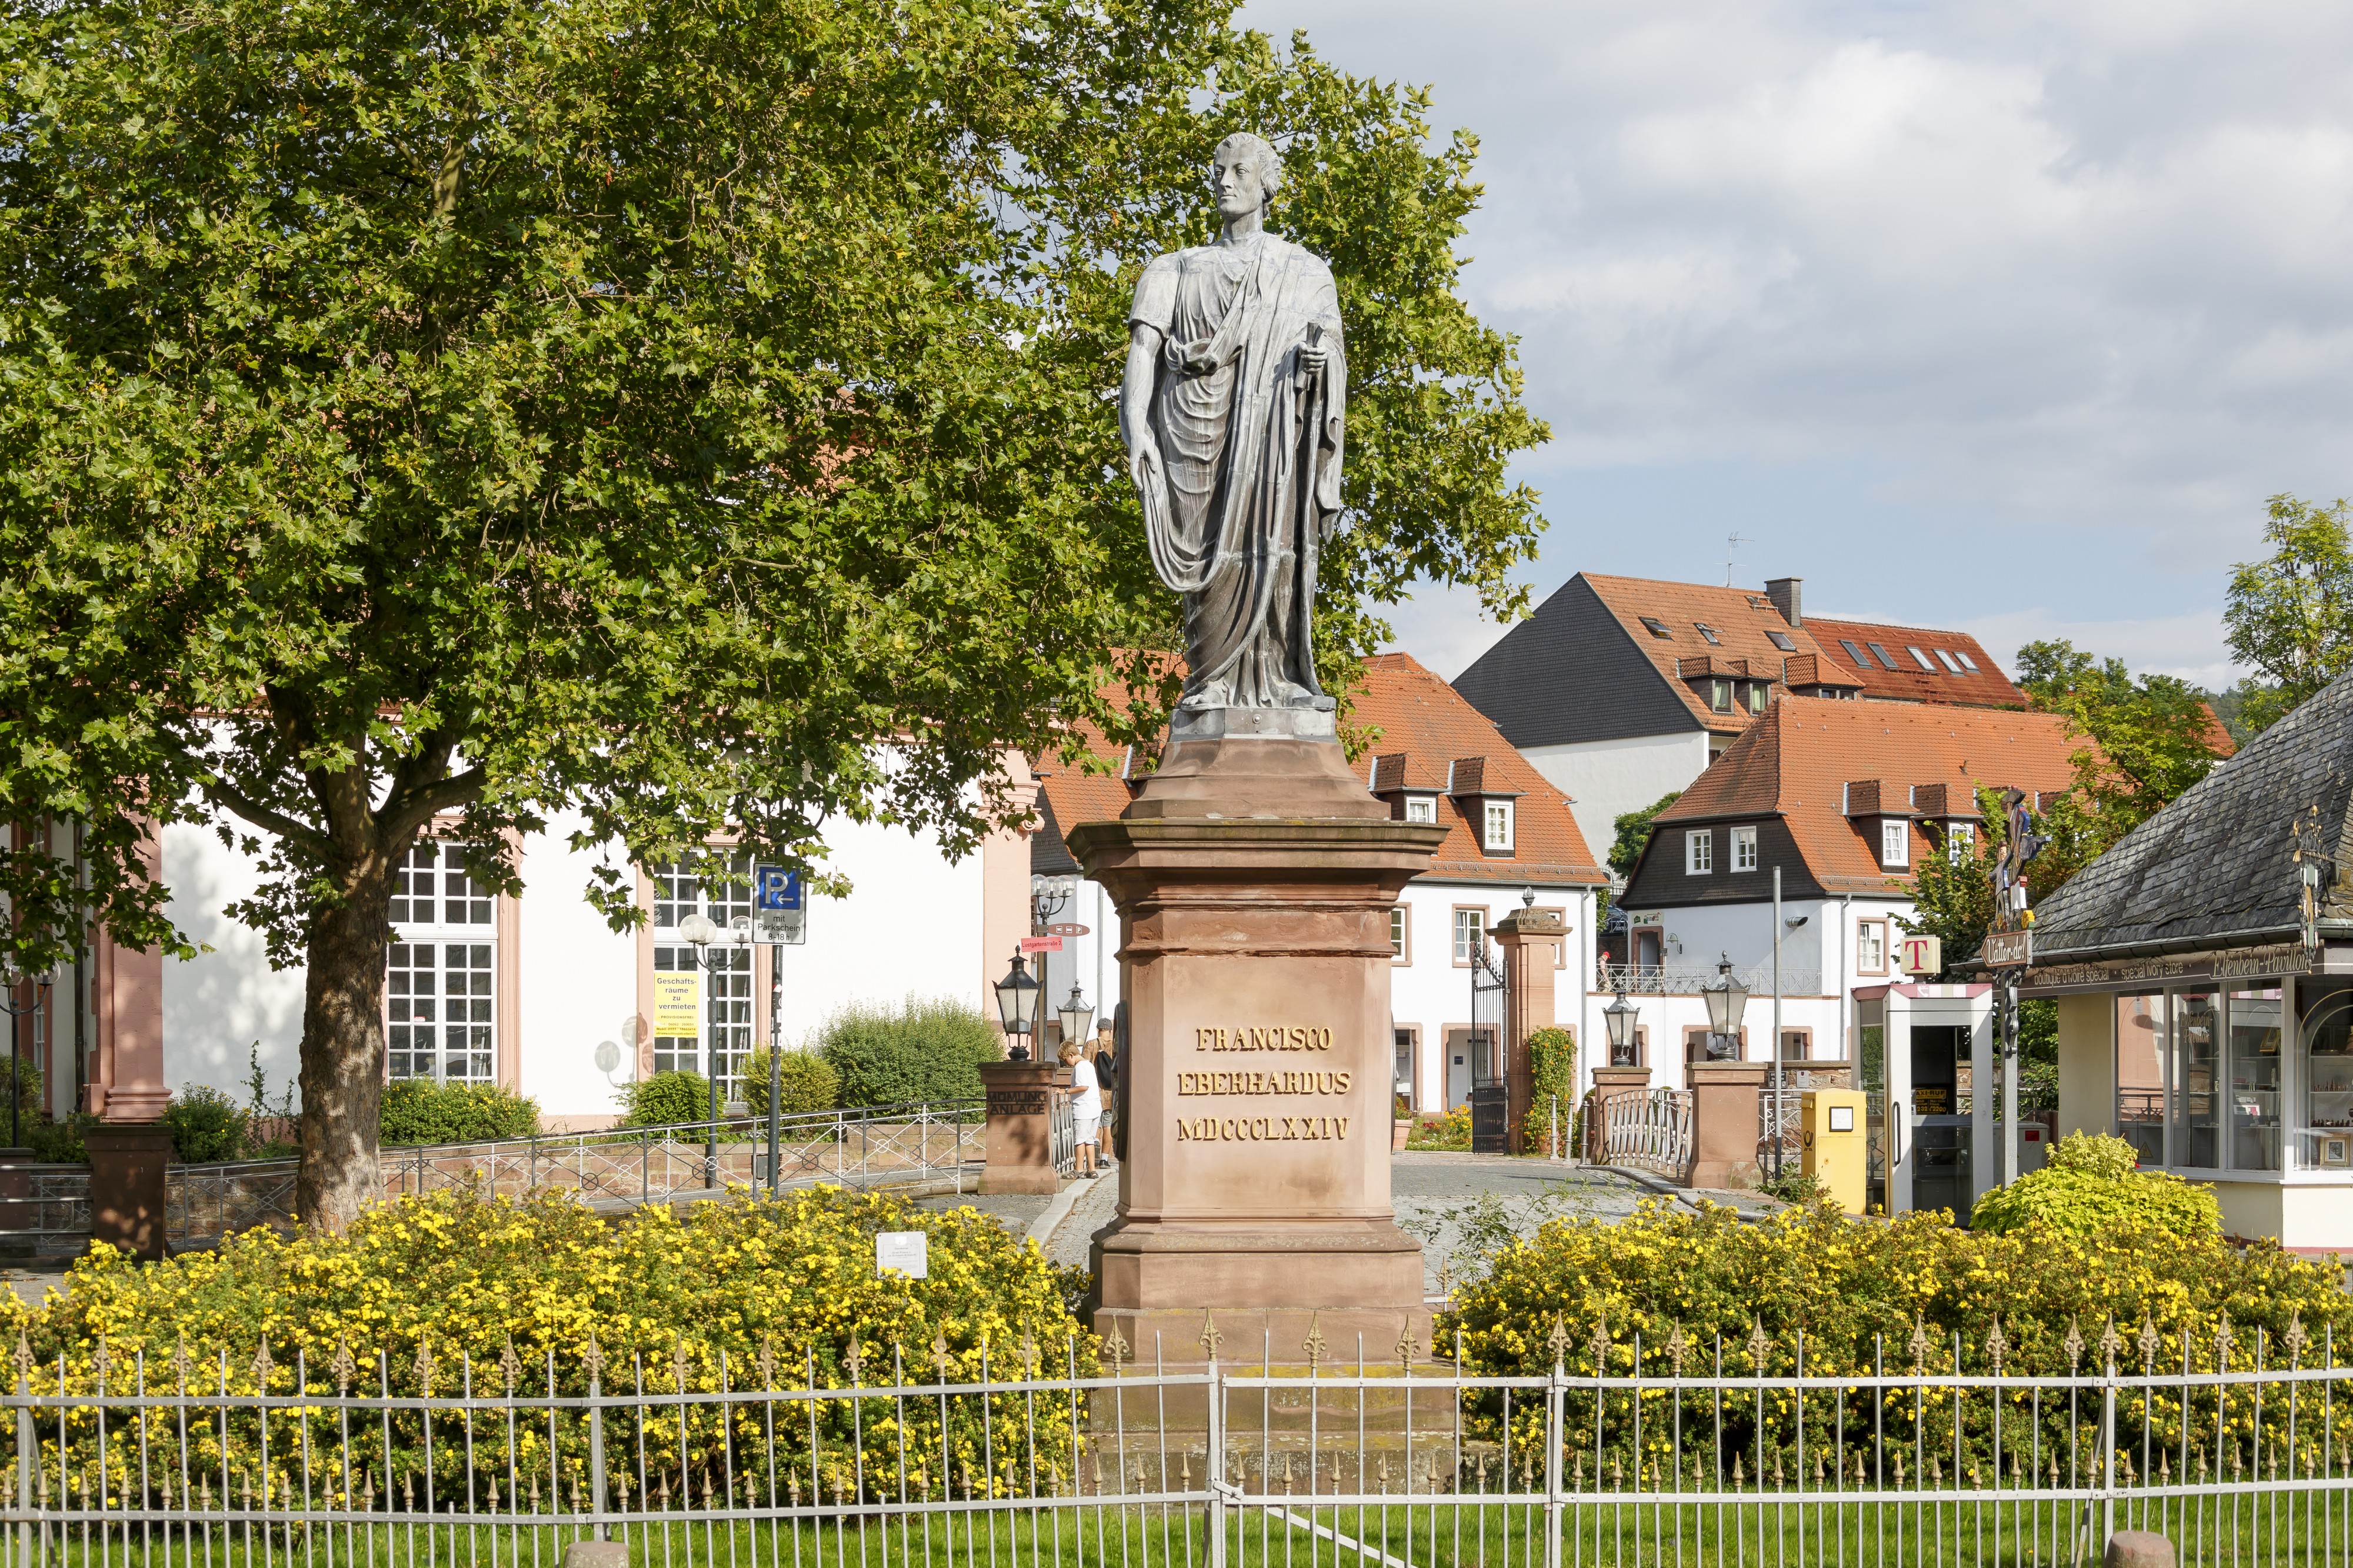 Erbach Germany Sculpture-of-Franz-Count of Erbach-02